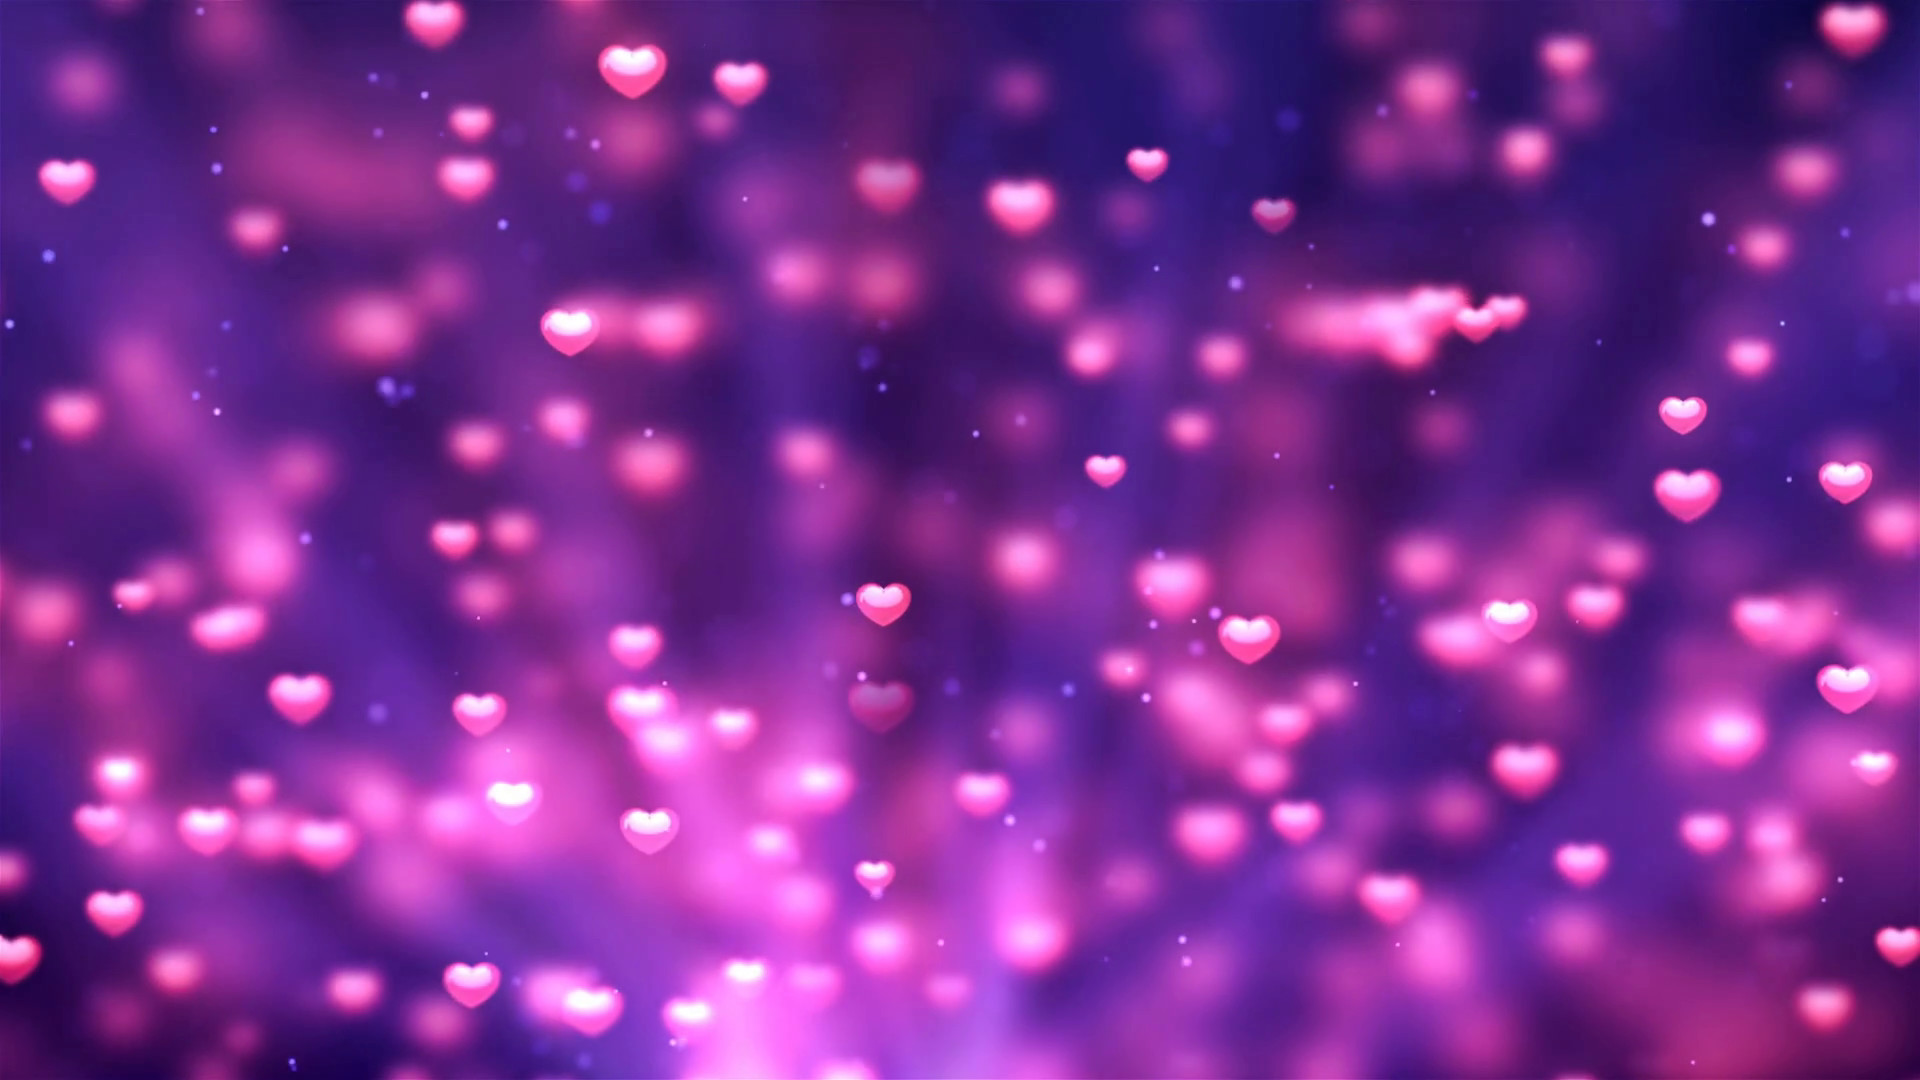 1920x1080 Purple Heart Valentine Romantic Spinning Dangling Glowing Love Hearts  colored Particles Moving Loop Background For Valentines Day, Mother's Day,  birthday, ...